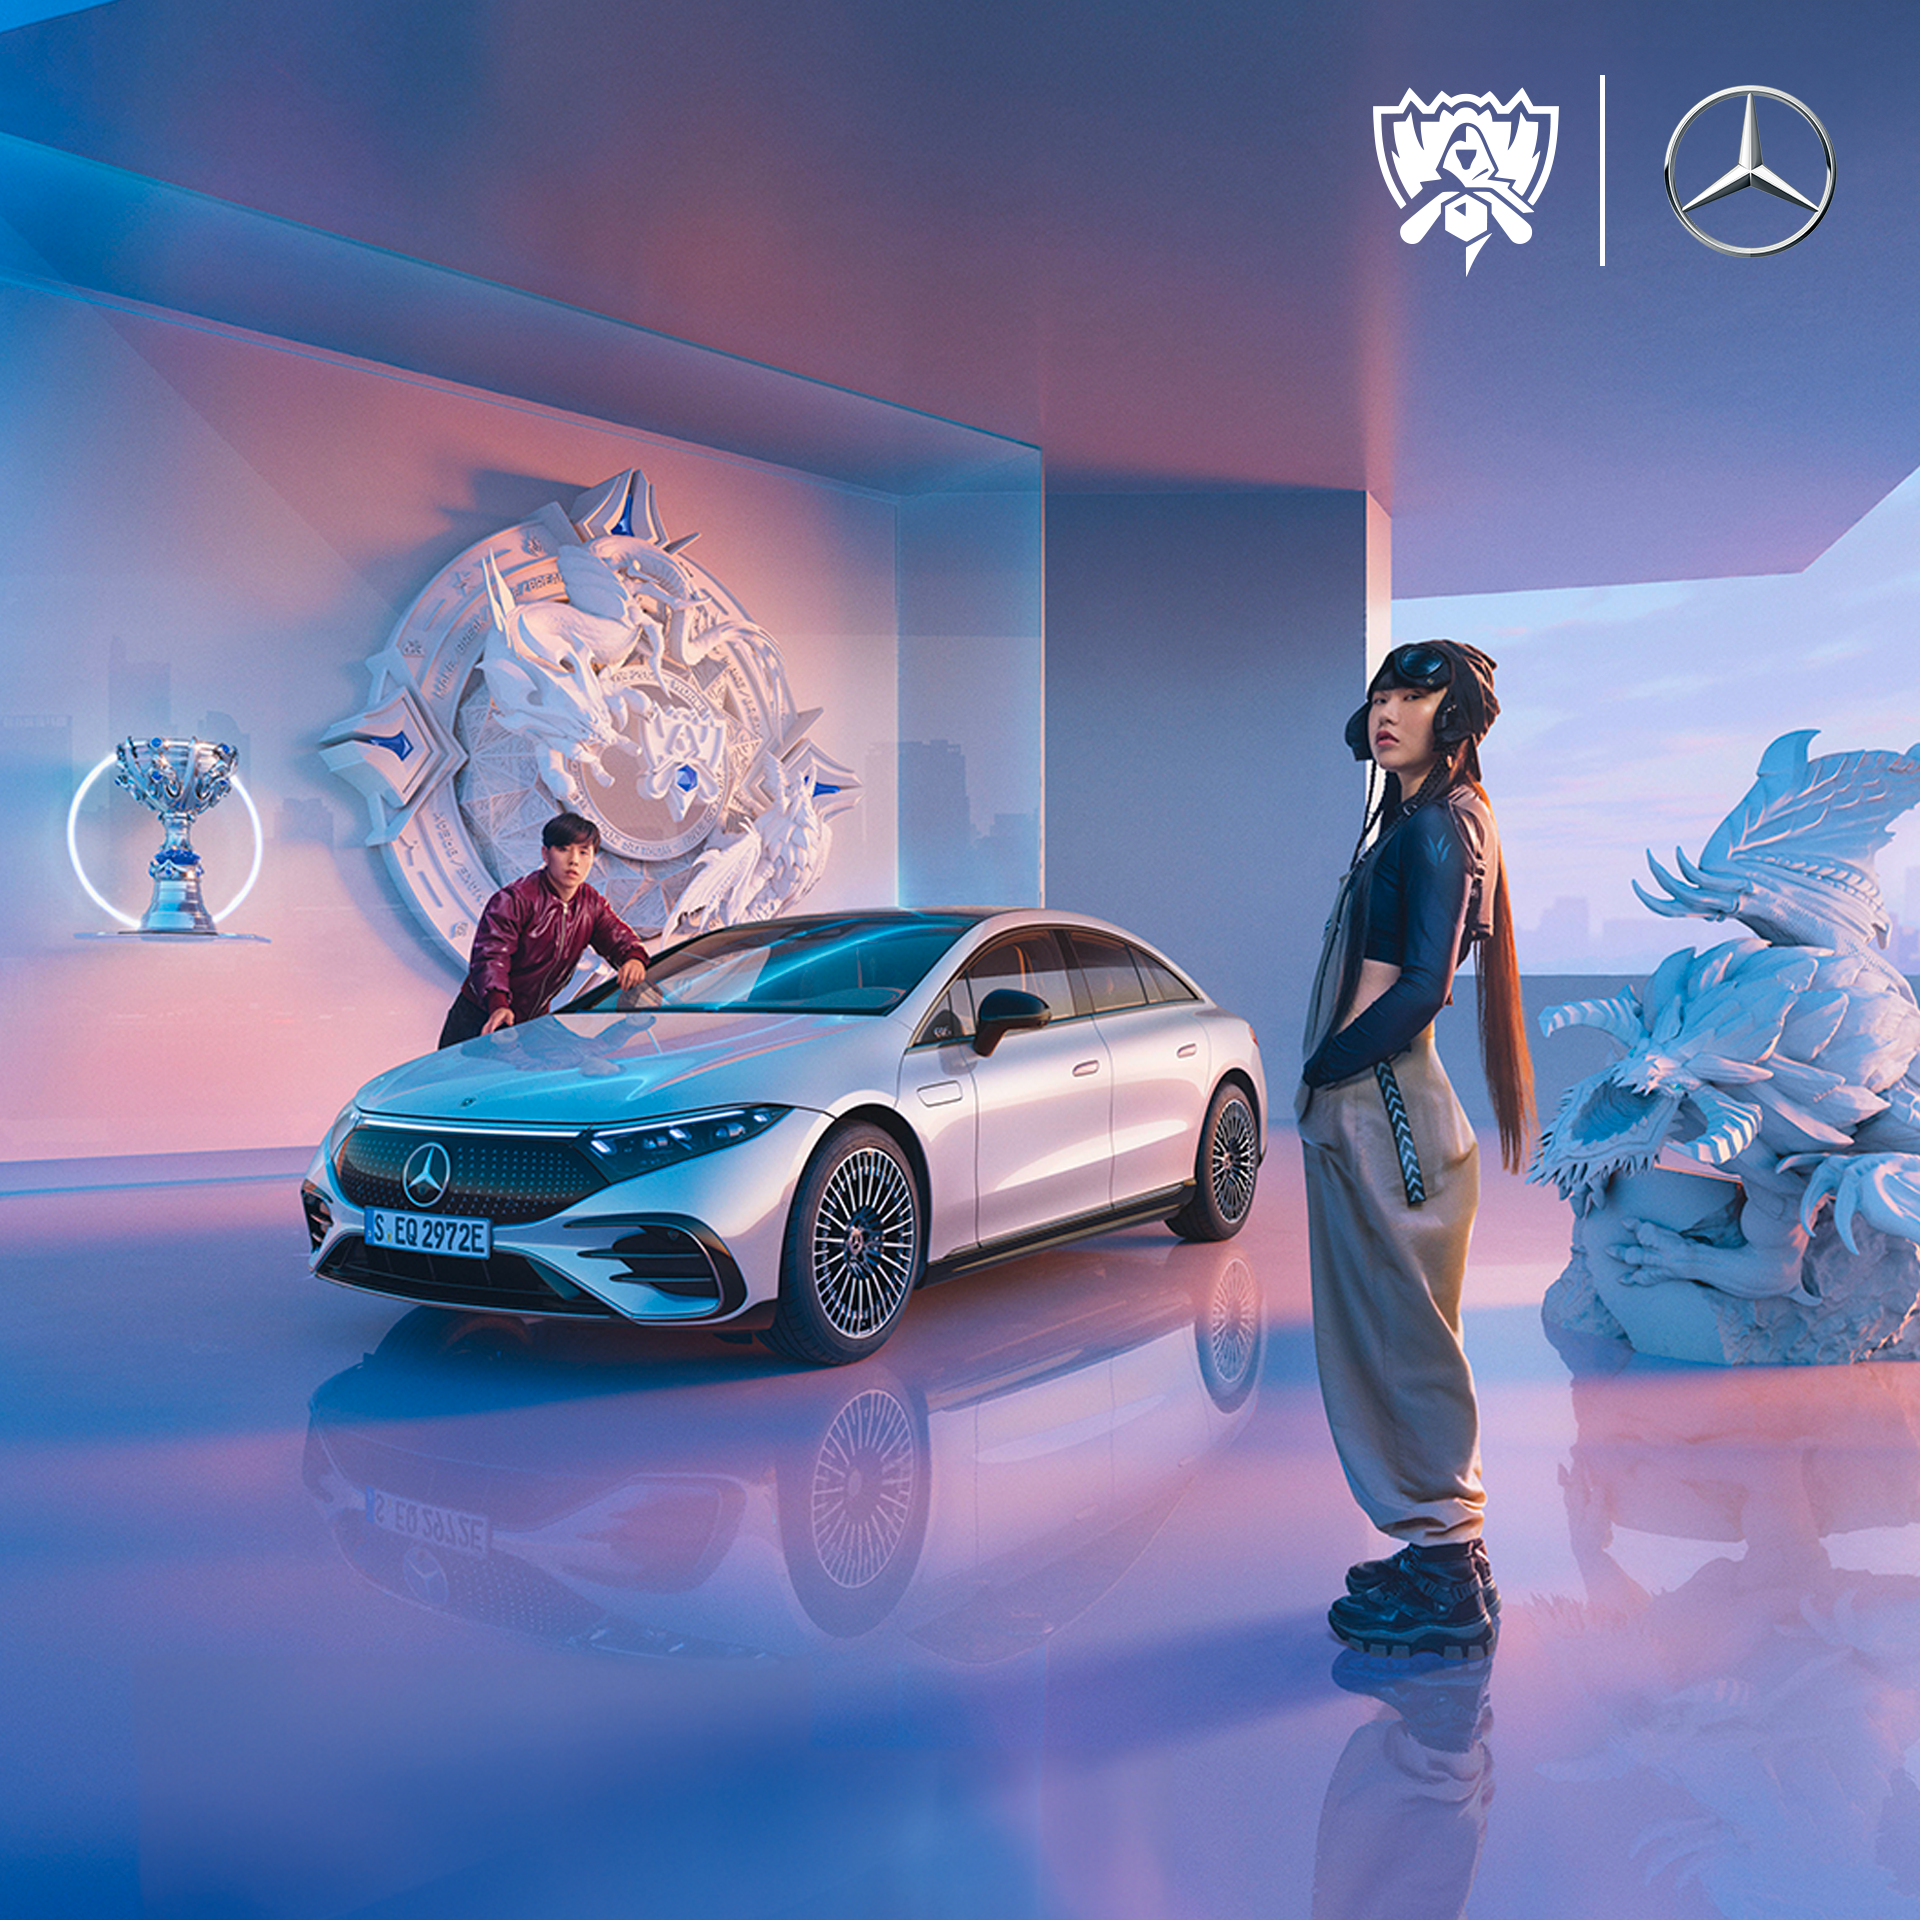 The image shows two people standing next to an EQ Mercedes car in a League of Legends background. Campaign „Exceed the game. Unleash the future“ by Jung von Matt NERDS that let Mercedes and League of Legends collaborate.